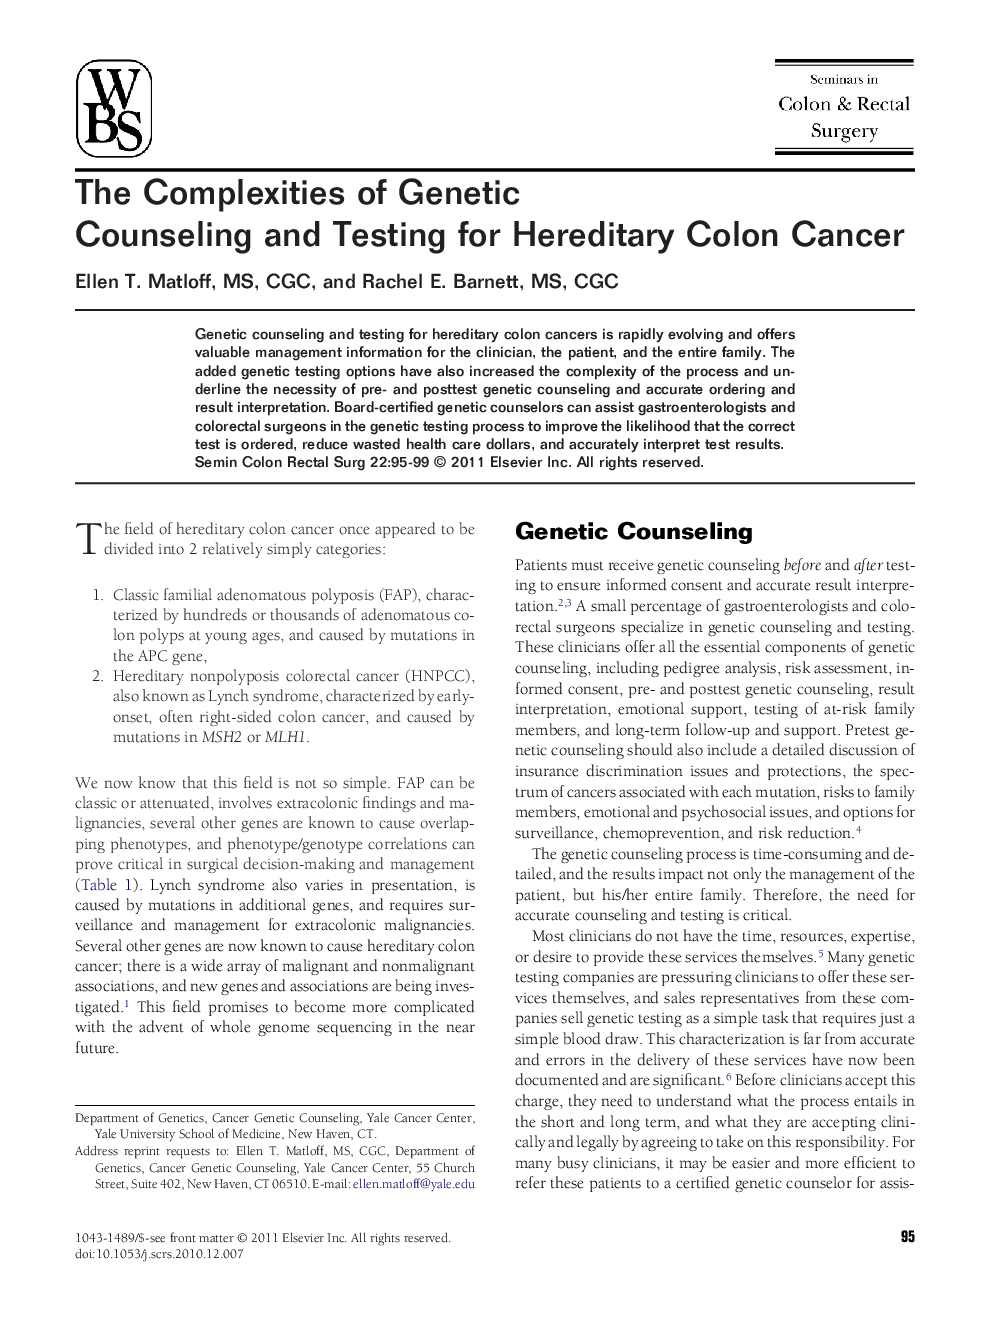 The Complexities of Genetic Counseling and Testing for Hereditary Colon Cancer